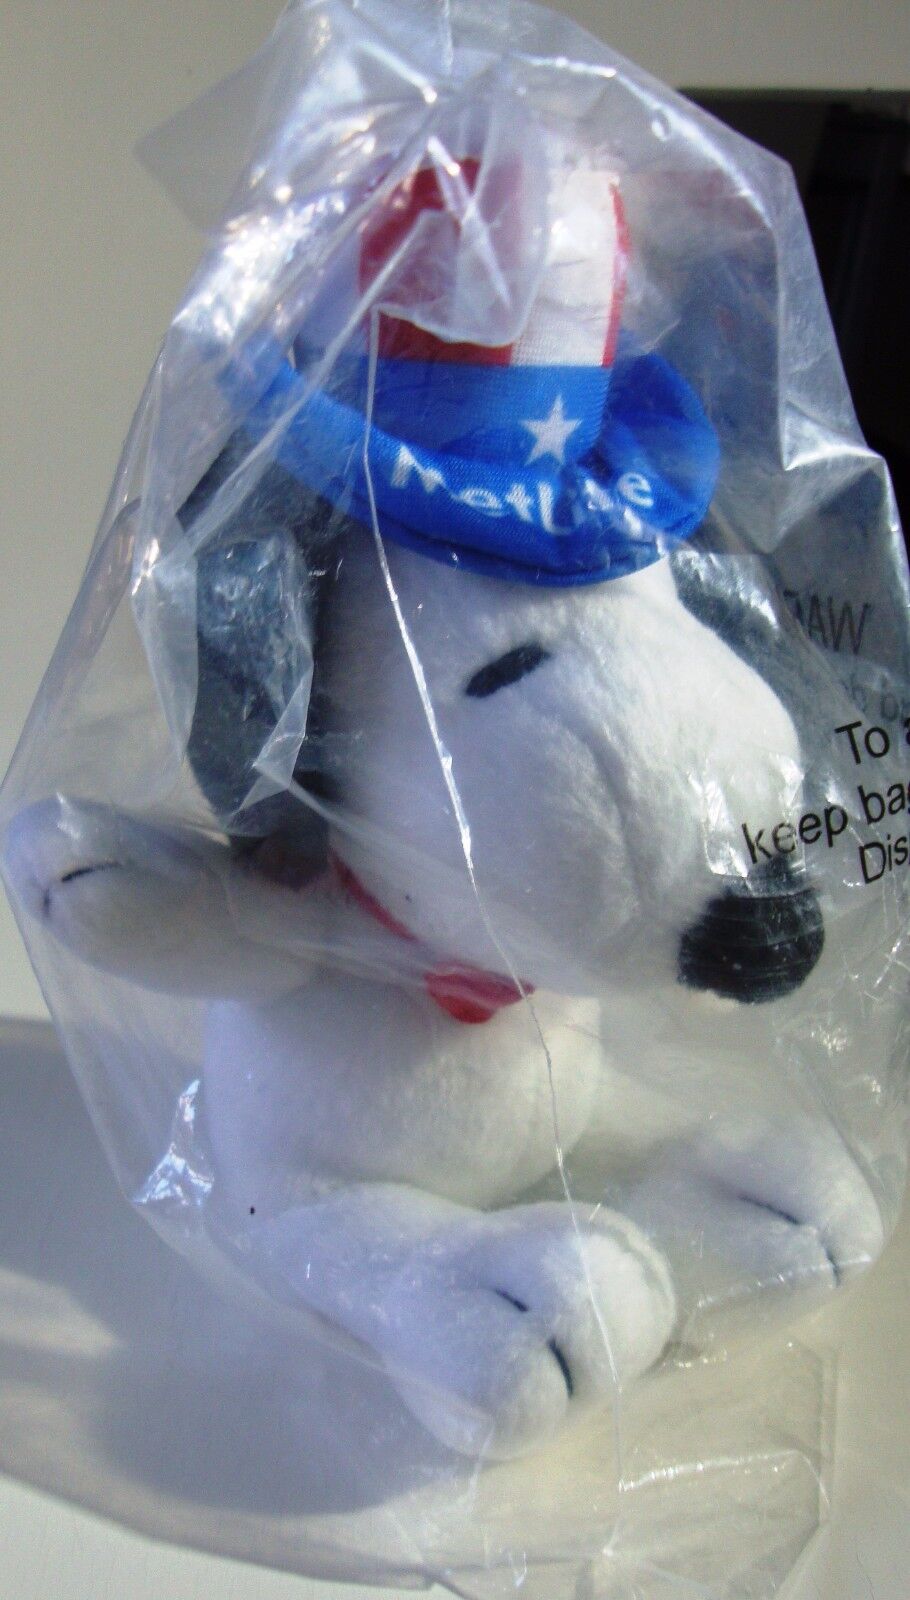 MetLife Insurance Co. Charles M. Schulz Peanuts Uncle Sam Snoopy Plush Toy 2011 